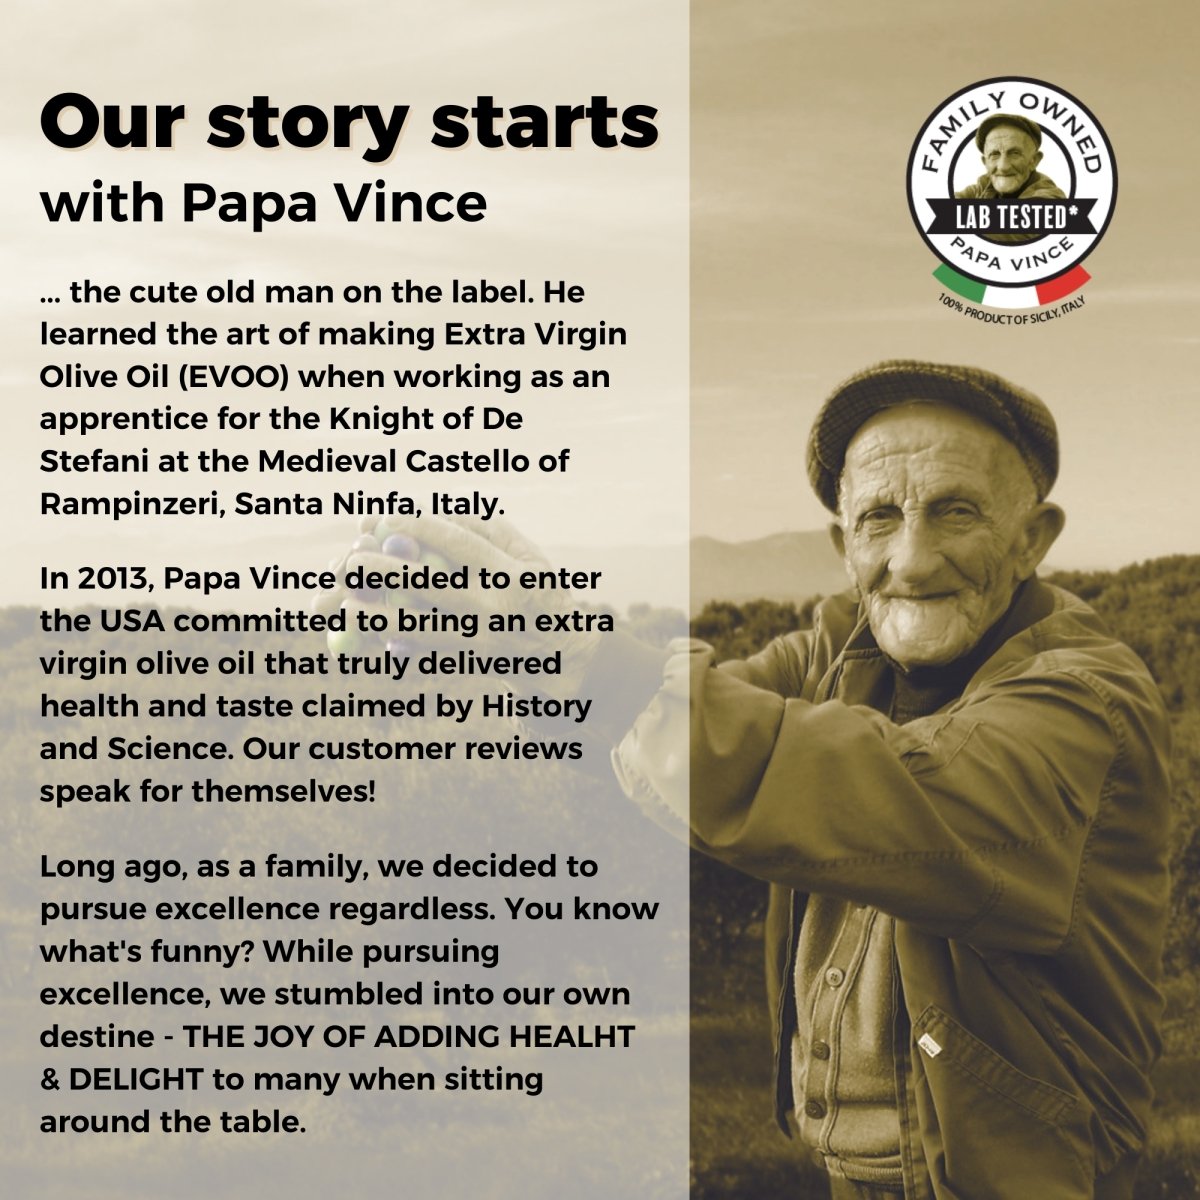 Papa Vince Pasta Tomato Sauce - Glass Canned, Clean Food, No Sugar Added, Low Acid for sensitive stomach | from Sicily, Italy, made with vine-ripened tomatoes handpicked at the peak of freshness to ensure exceptional taste 11.6 oz - Papa Vince